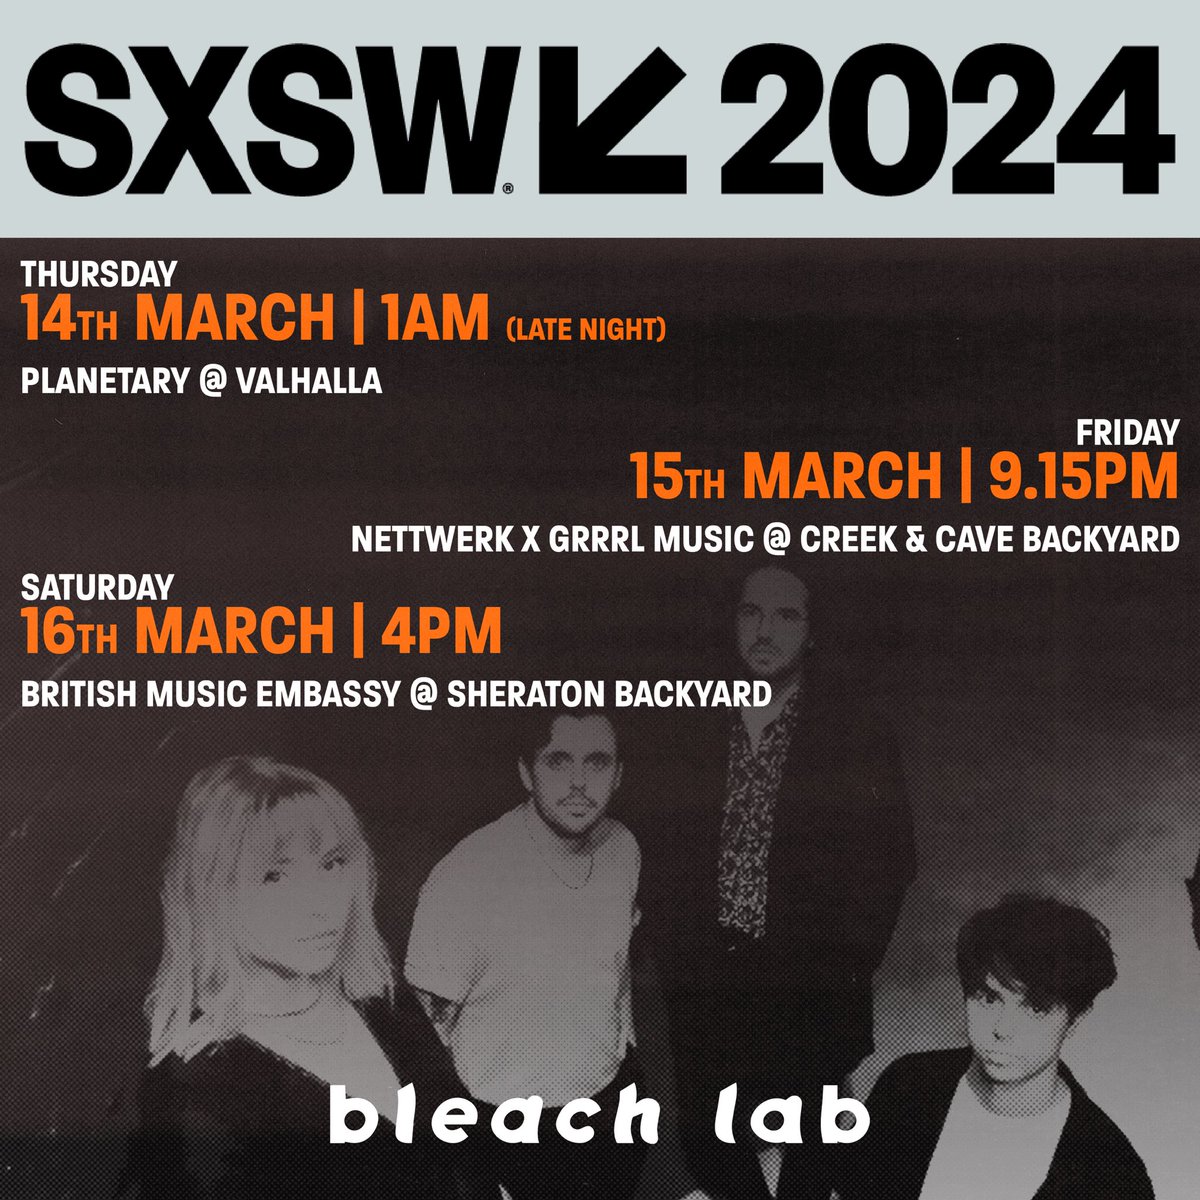 Just over a week until we head to @sxsw !! we can’t wait to meet you all 🇺🇸❤️ all shows below ⬇️